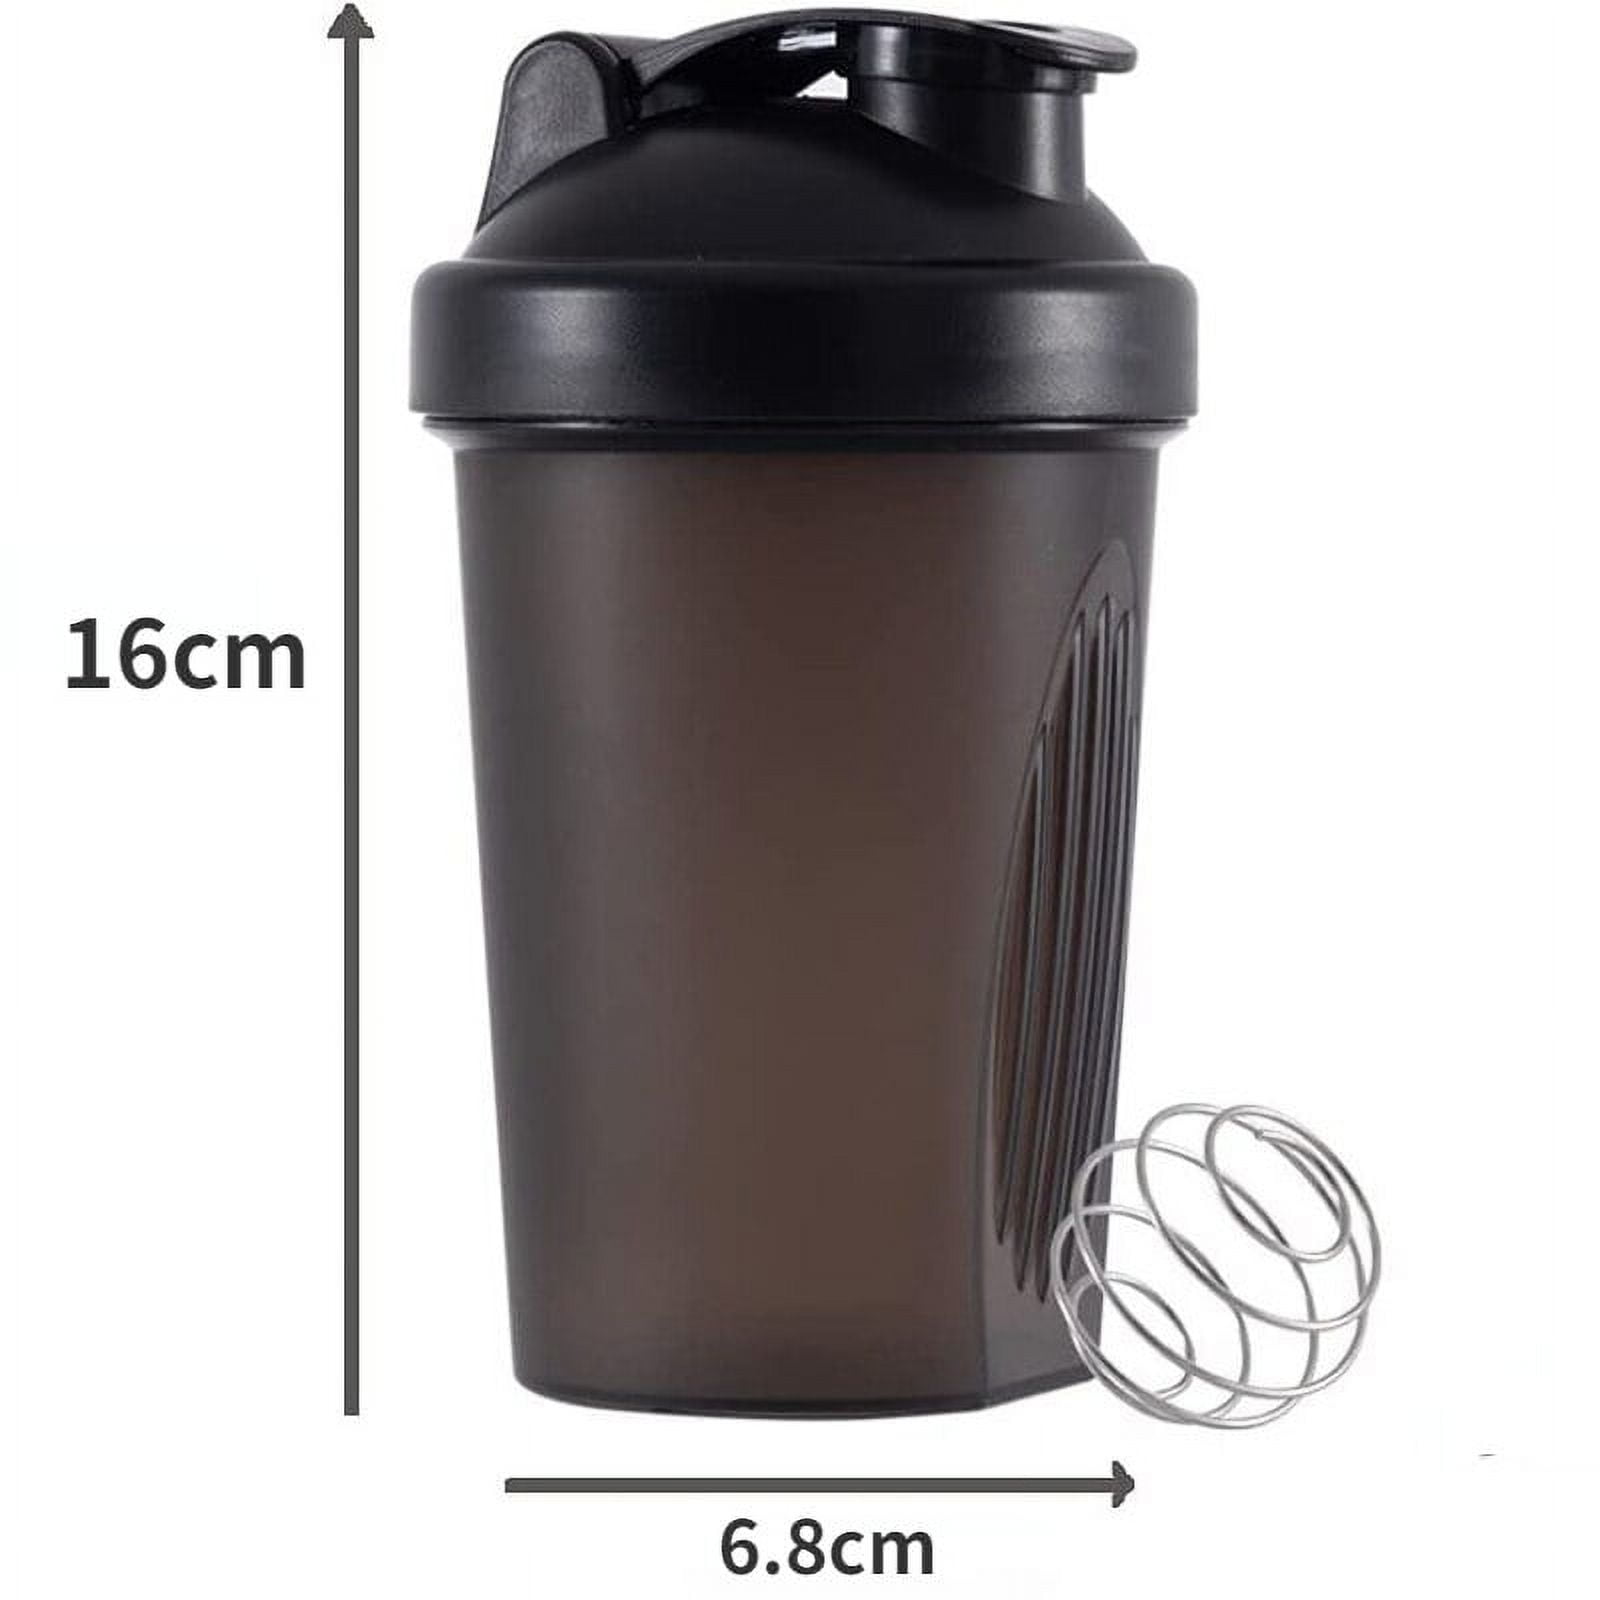 Ruiqas Protein Shaker Bottle Supplement Mixer Cup with Powder